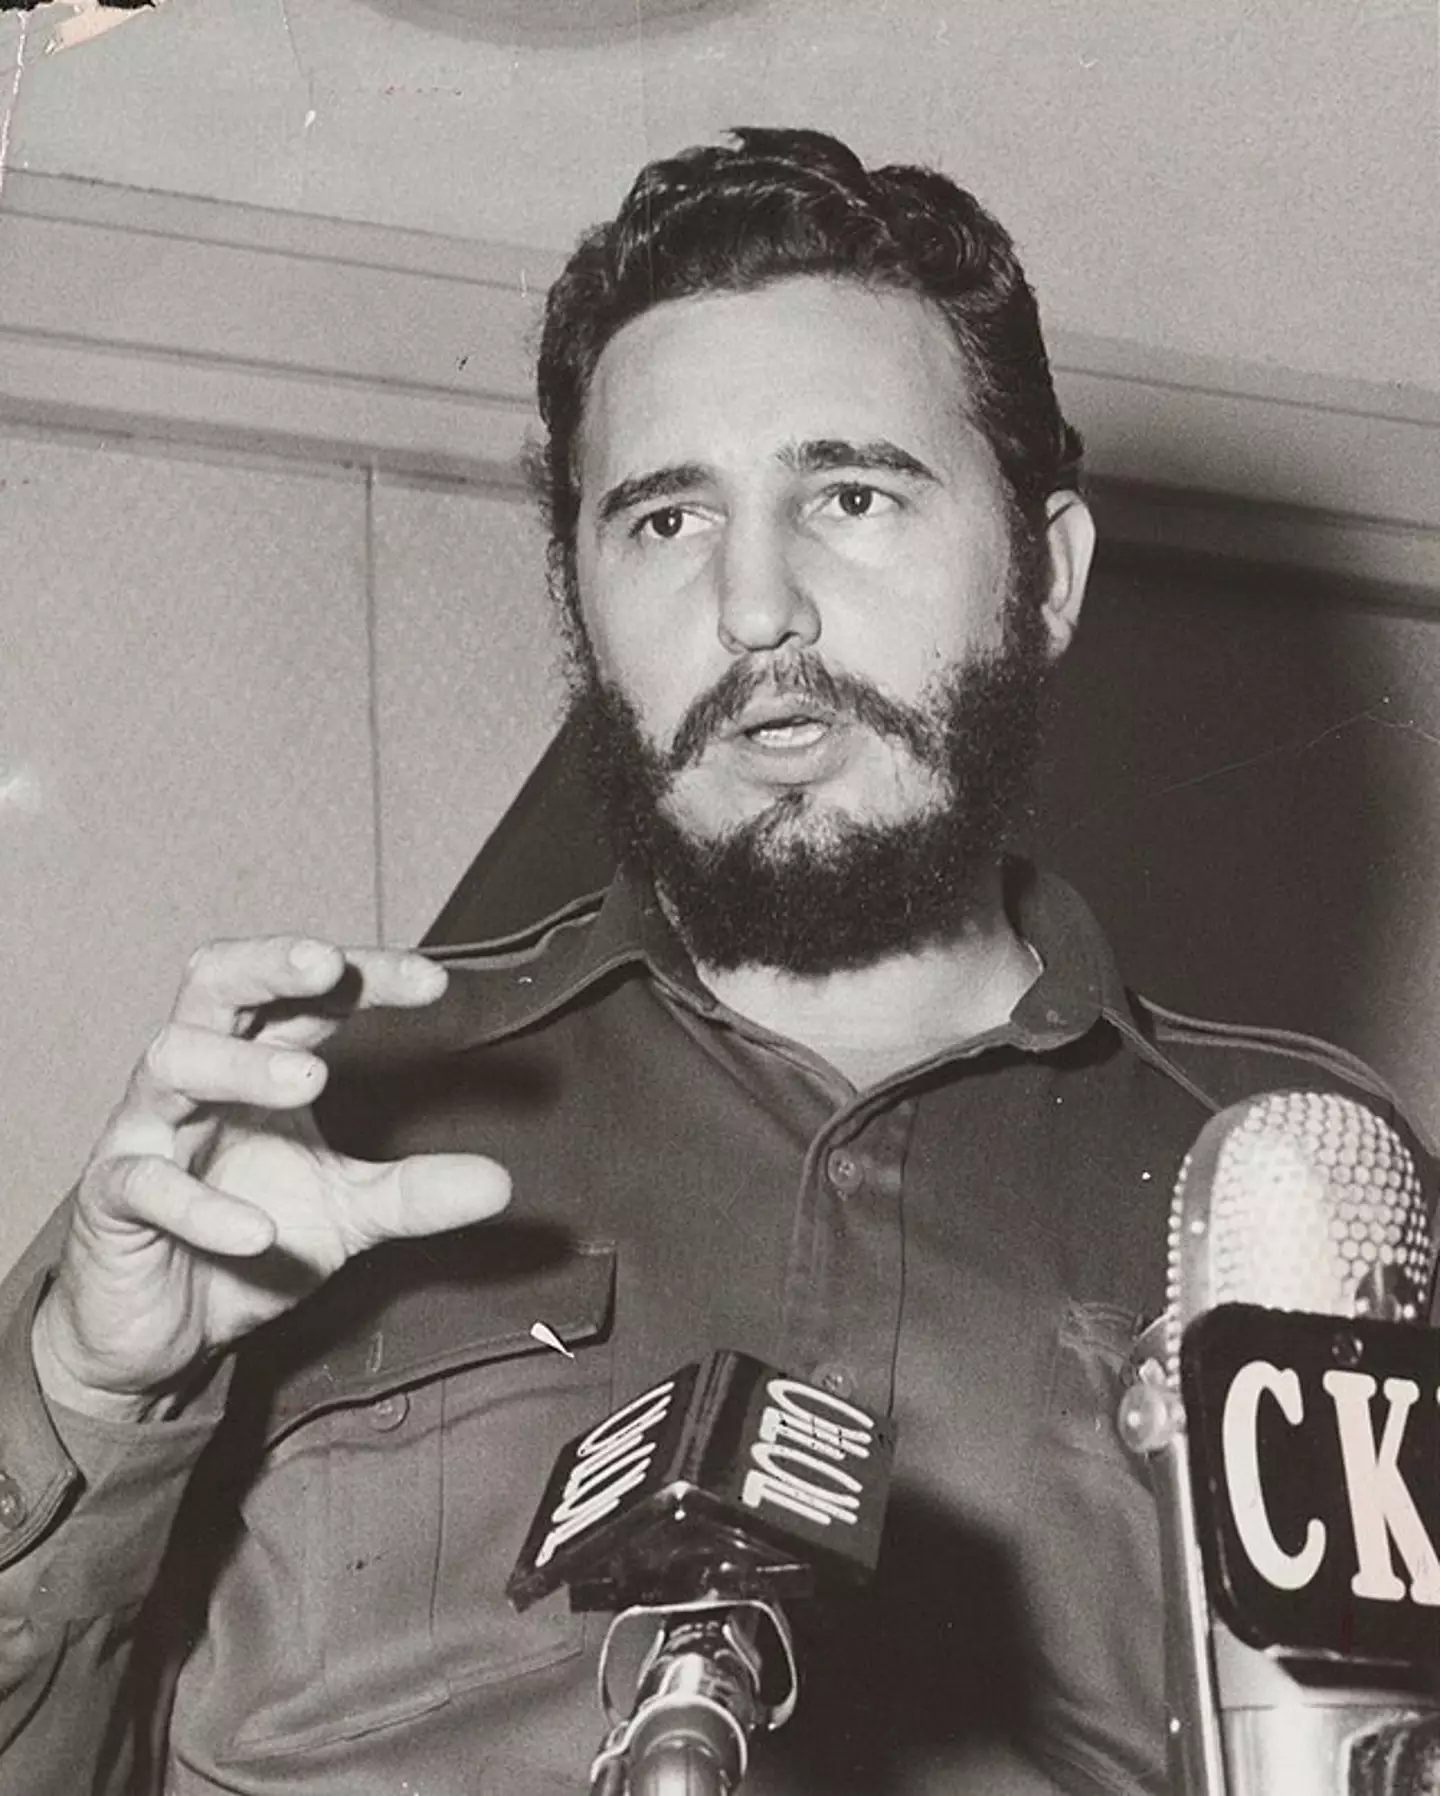 The actor will play the late Cuban leader Fidel Castro.